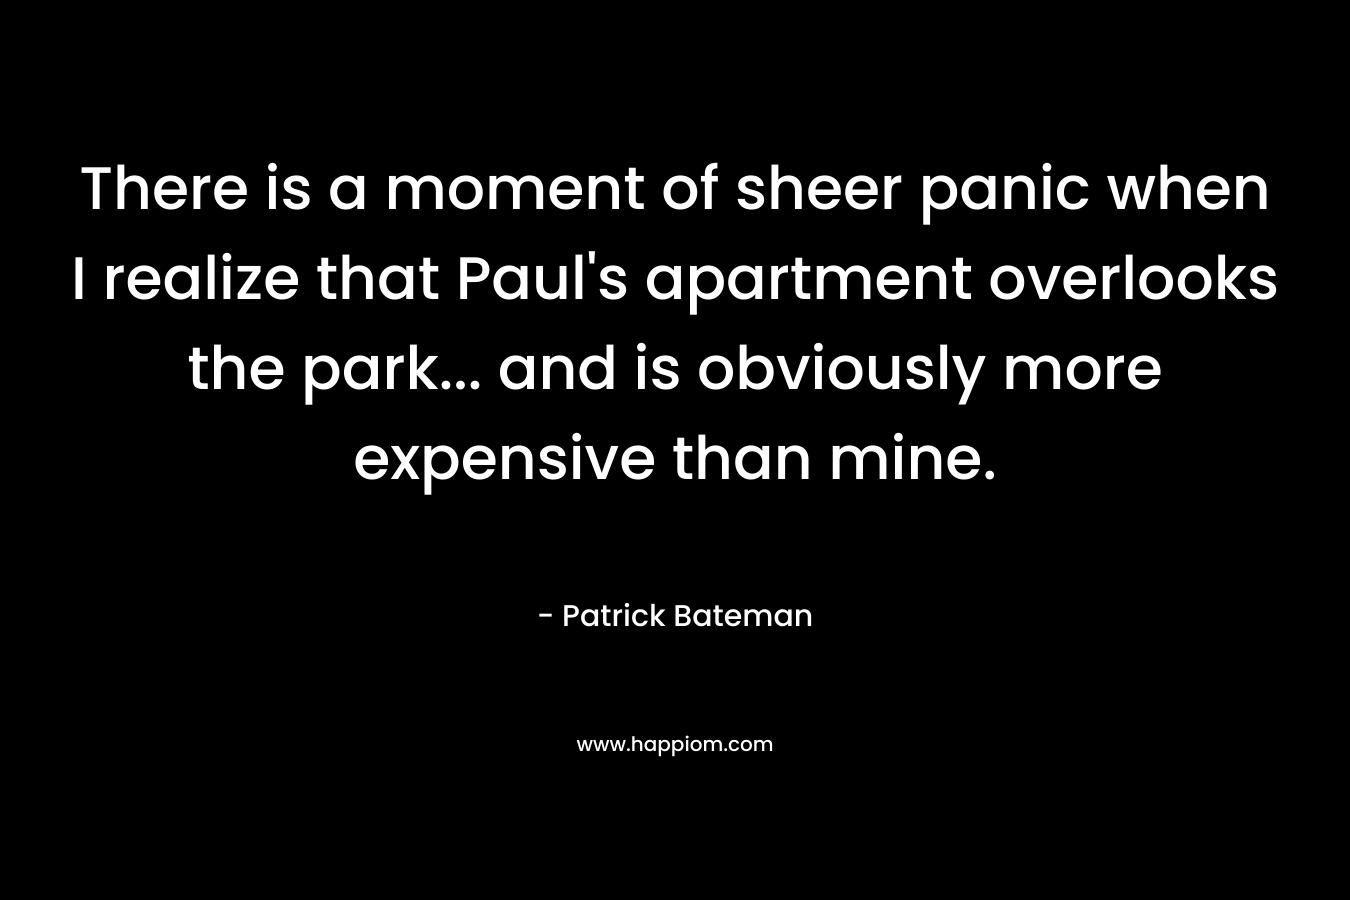 There is a moment of sheer panic when I realize that Paul’s apartment overlooks the park… and is obviously more expensive than mine. – Patrick Bateman